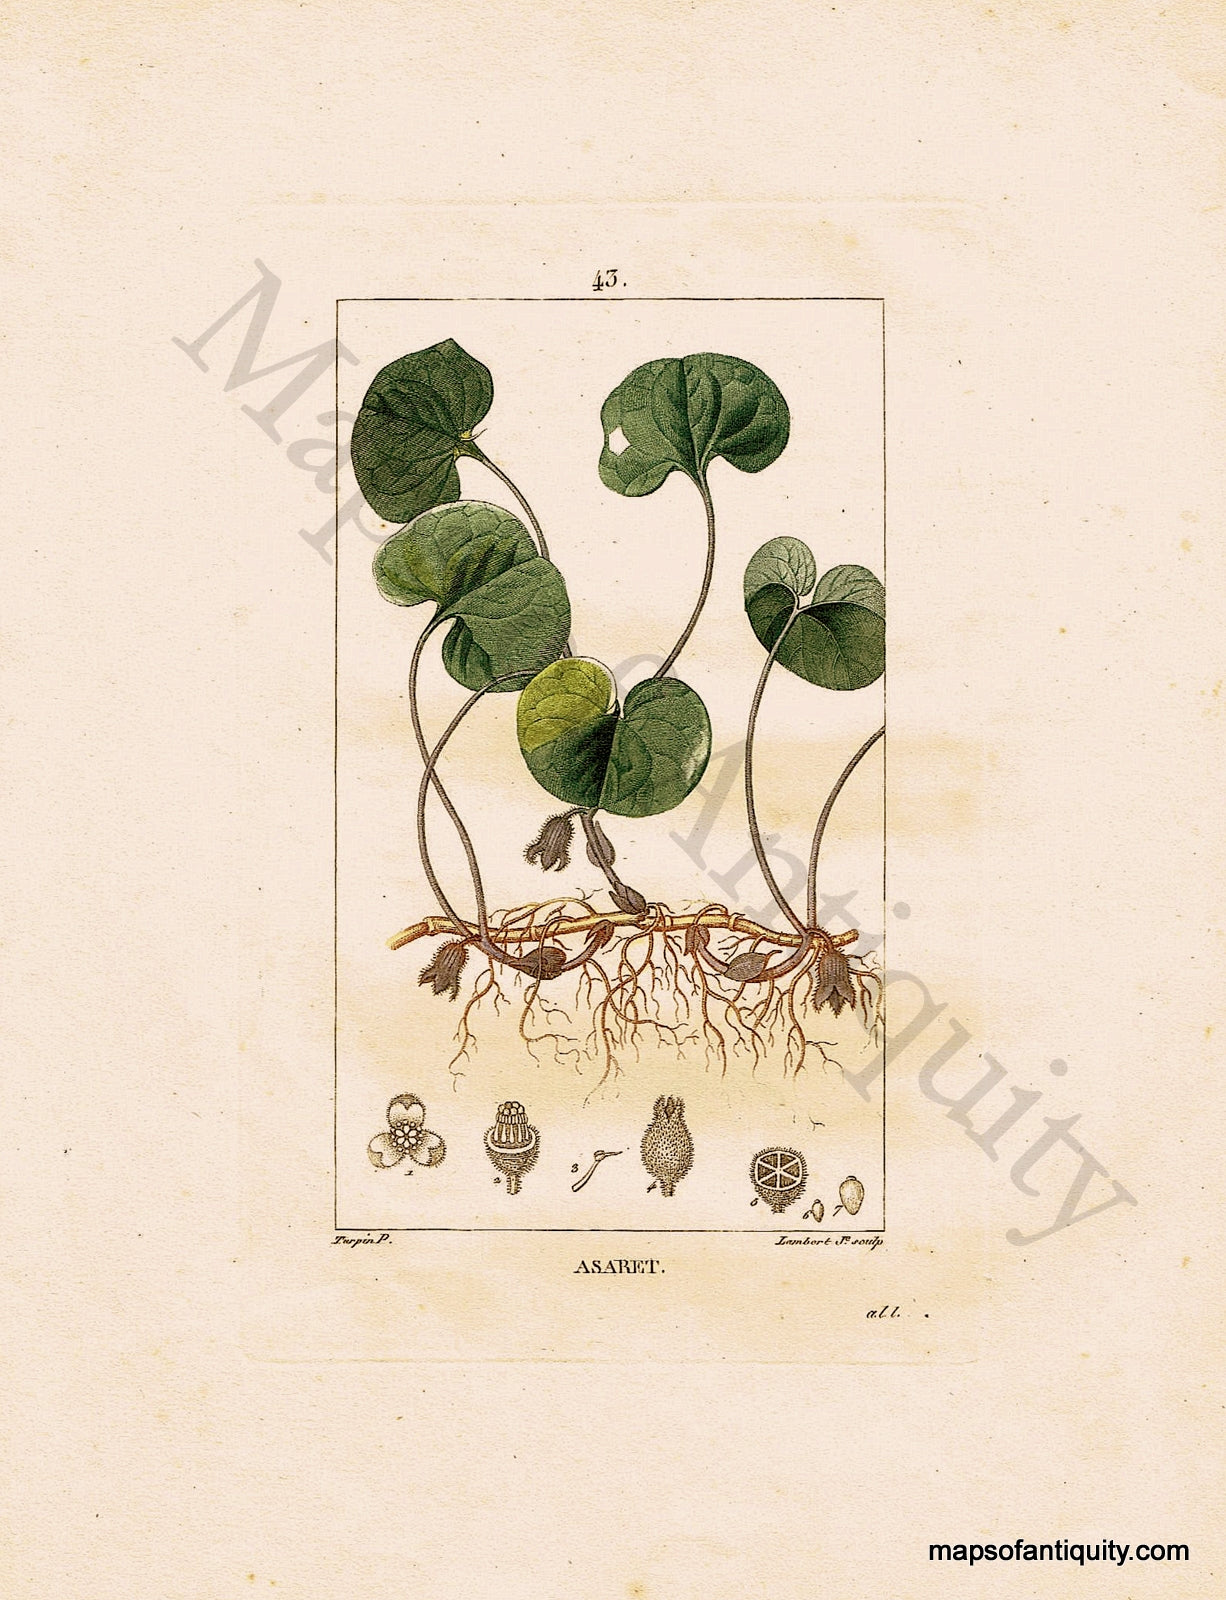 Hand-Colored-Antique-Engraving-Asaret---Wild-Ginger-Natural-History-Prints-Botancial-1840-Lambert-Maps-Of-Antiquity